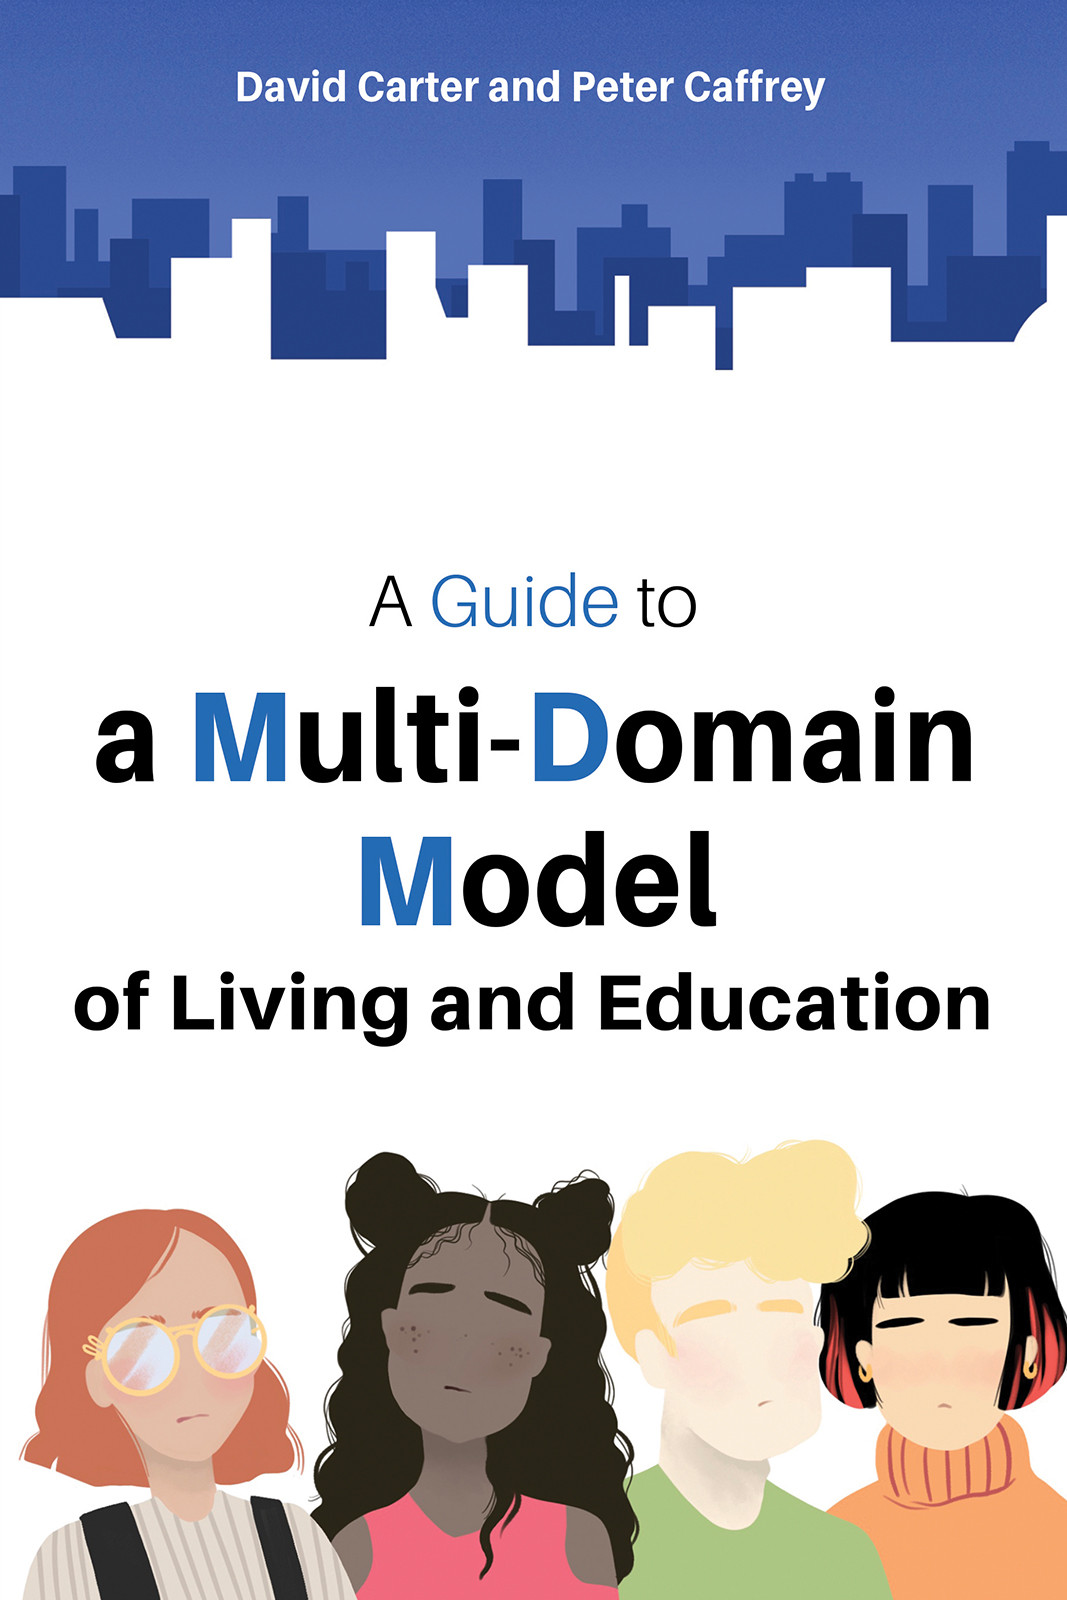 A Guide to a Multi-Domain Model of Living and Education